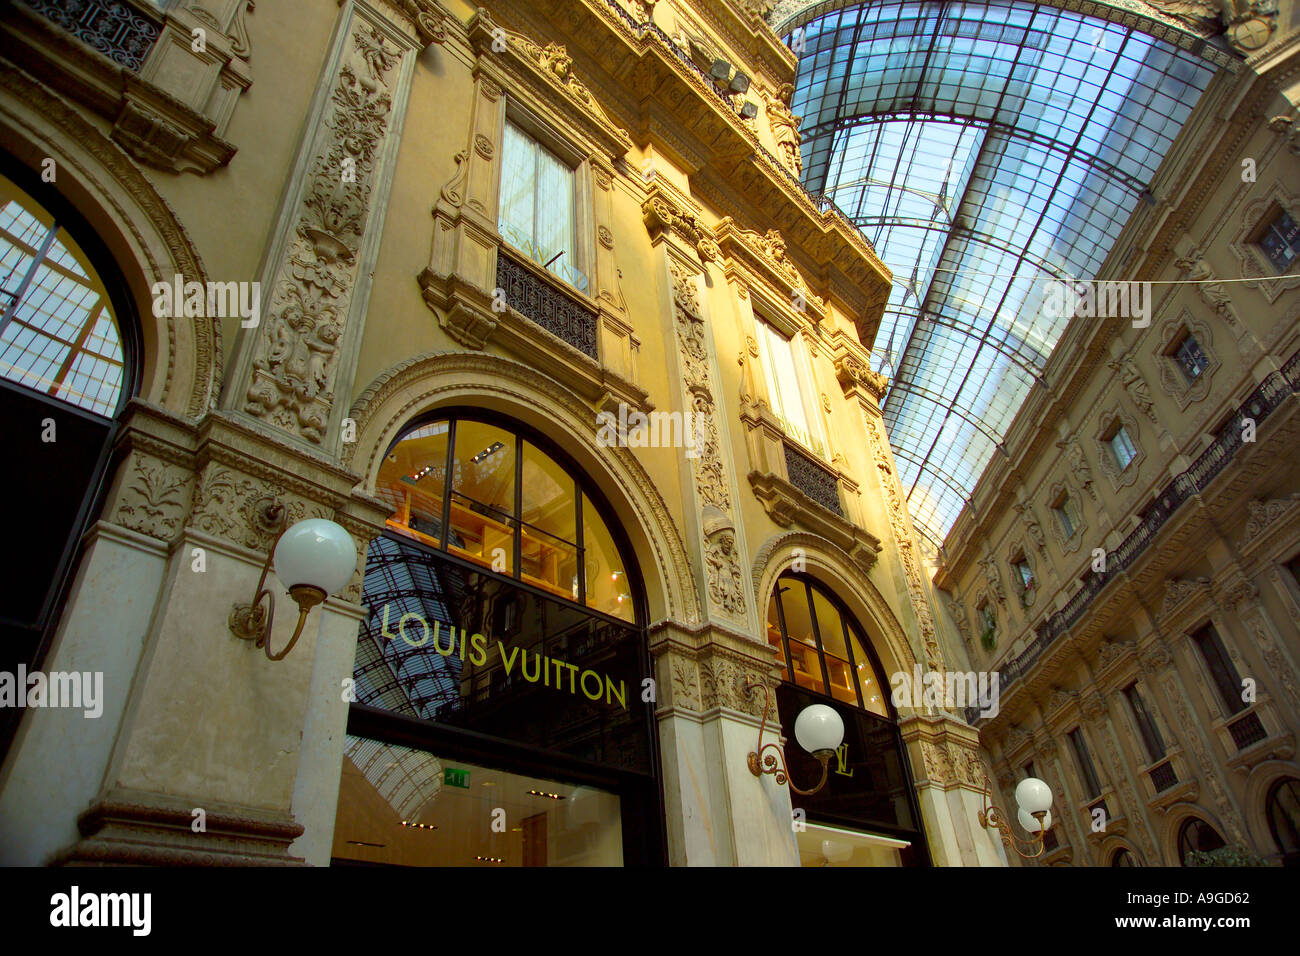 Milan, Italy - May 25 2018: Louis Vuitton Shop In Galleria Vittorio  Emanuele II On Background In Milan, Italy Stock Photo, Picture and Royalty  Free Image. Image 111723653.